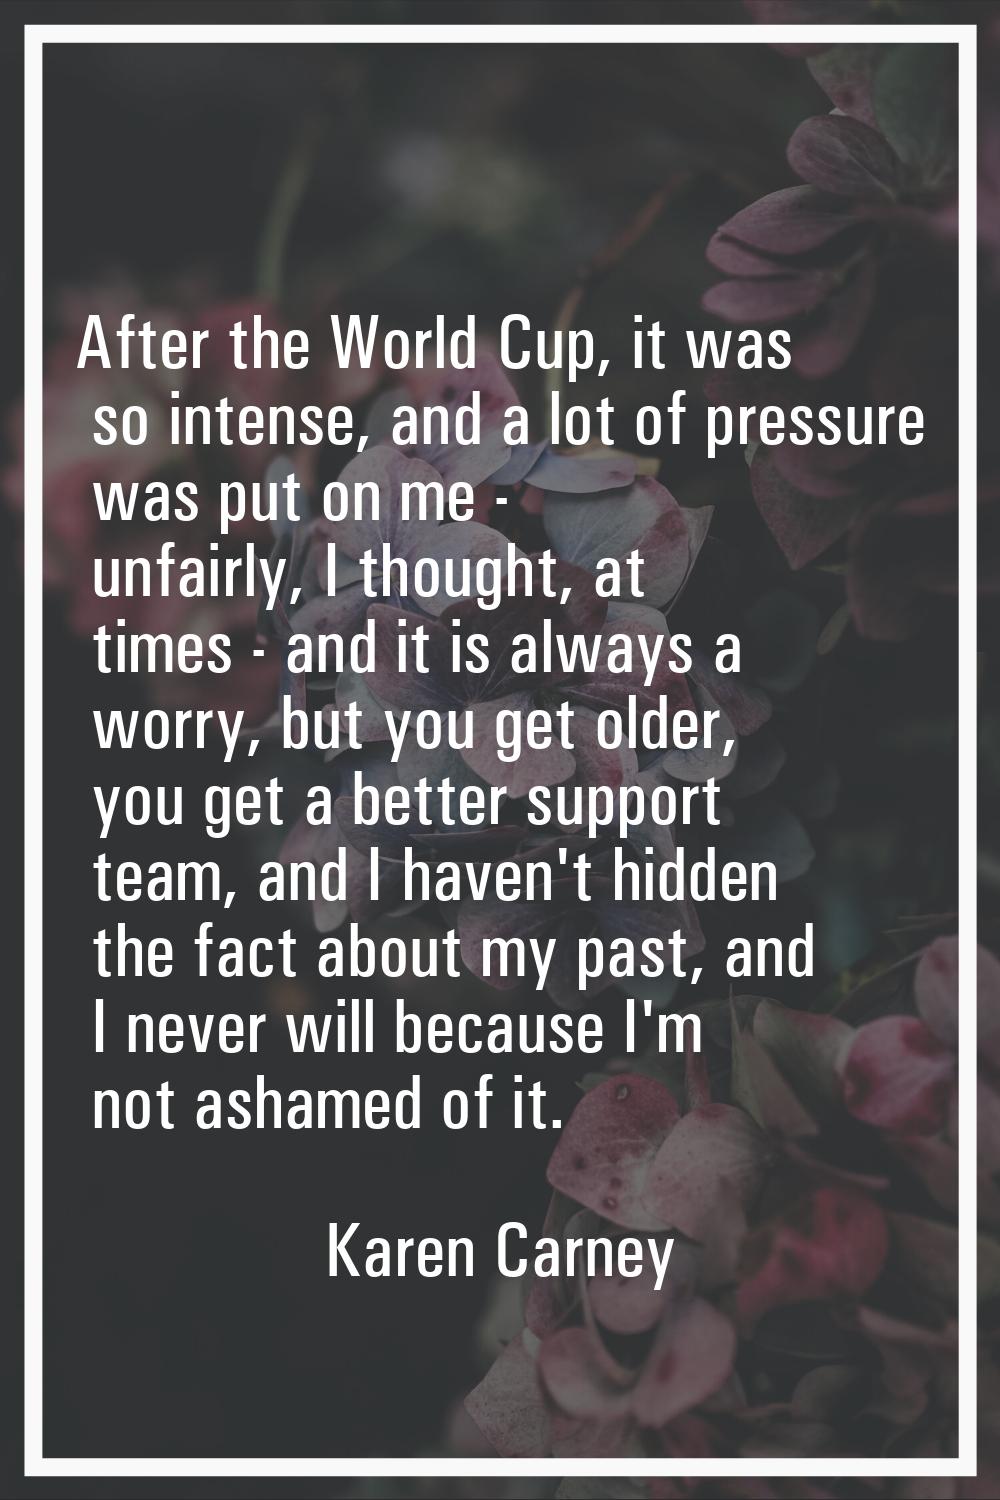 After the World Cup, it was so intense, and a lot of pressure was put on me - unfairly, I thought, 